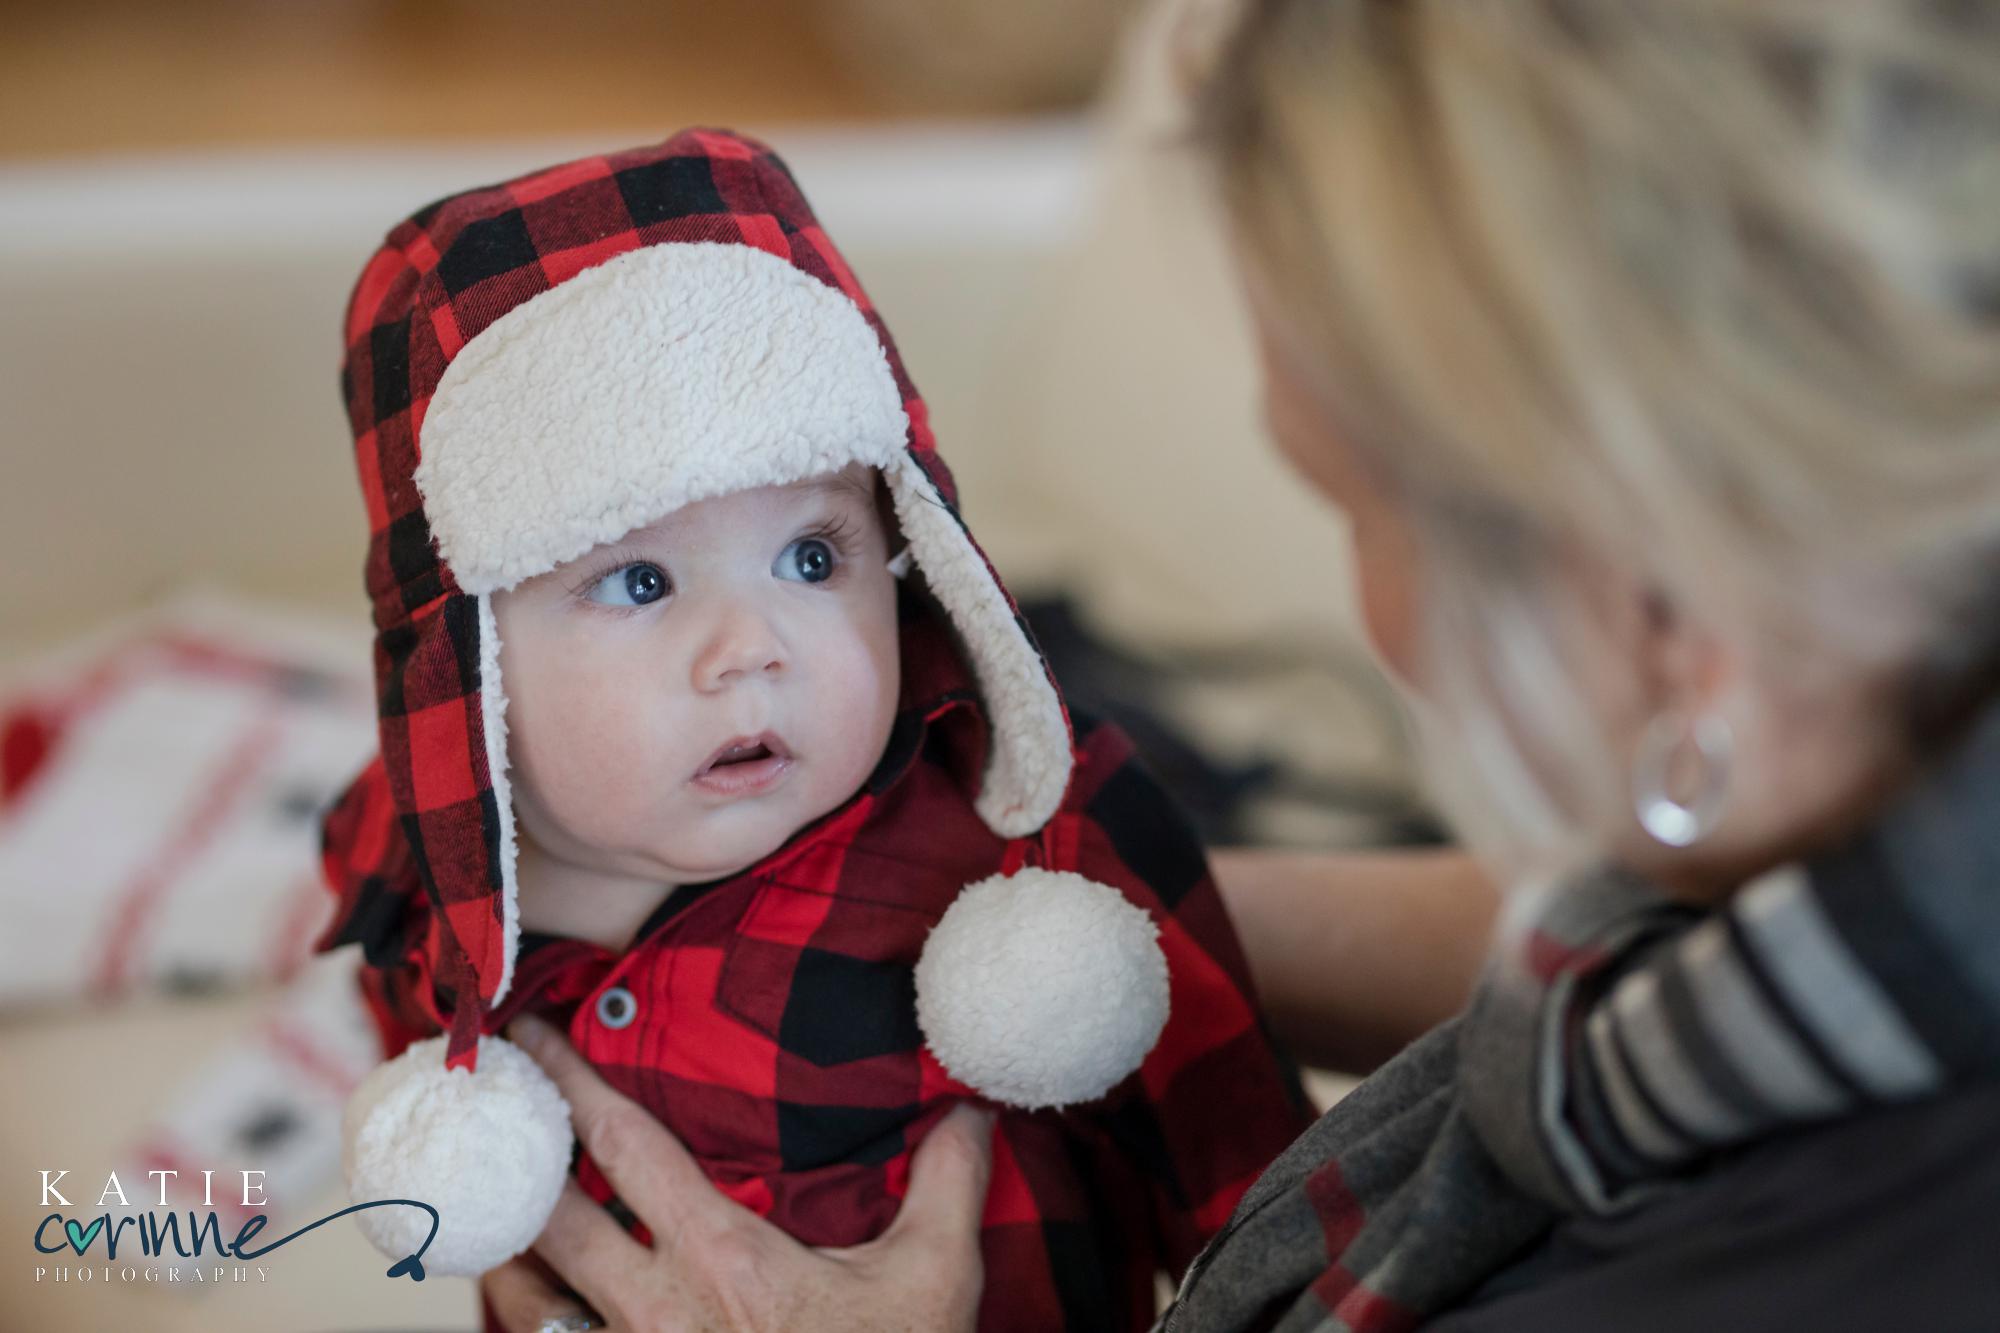 Colorado Baby dressed in plaid looks up at woman